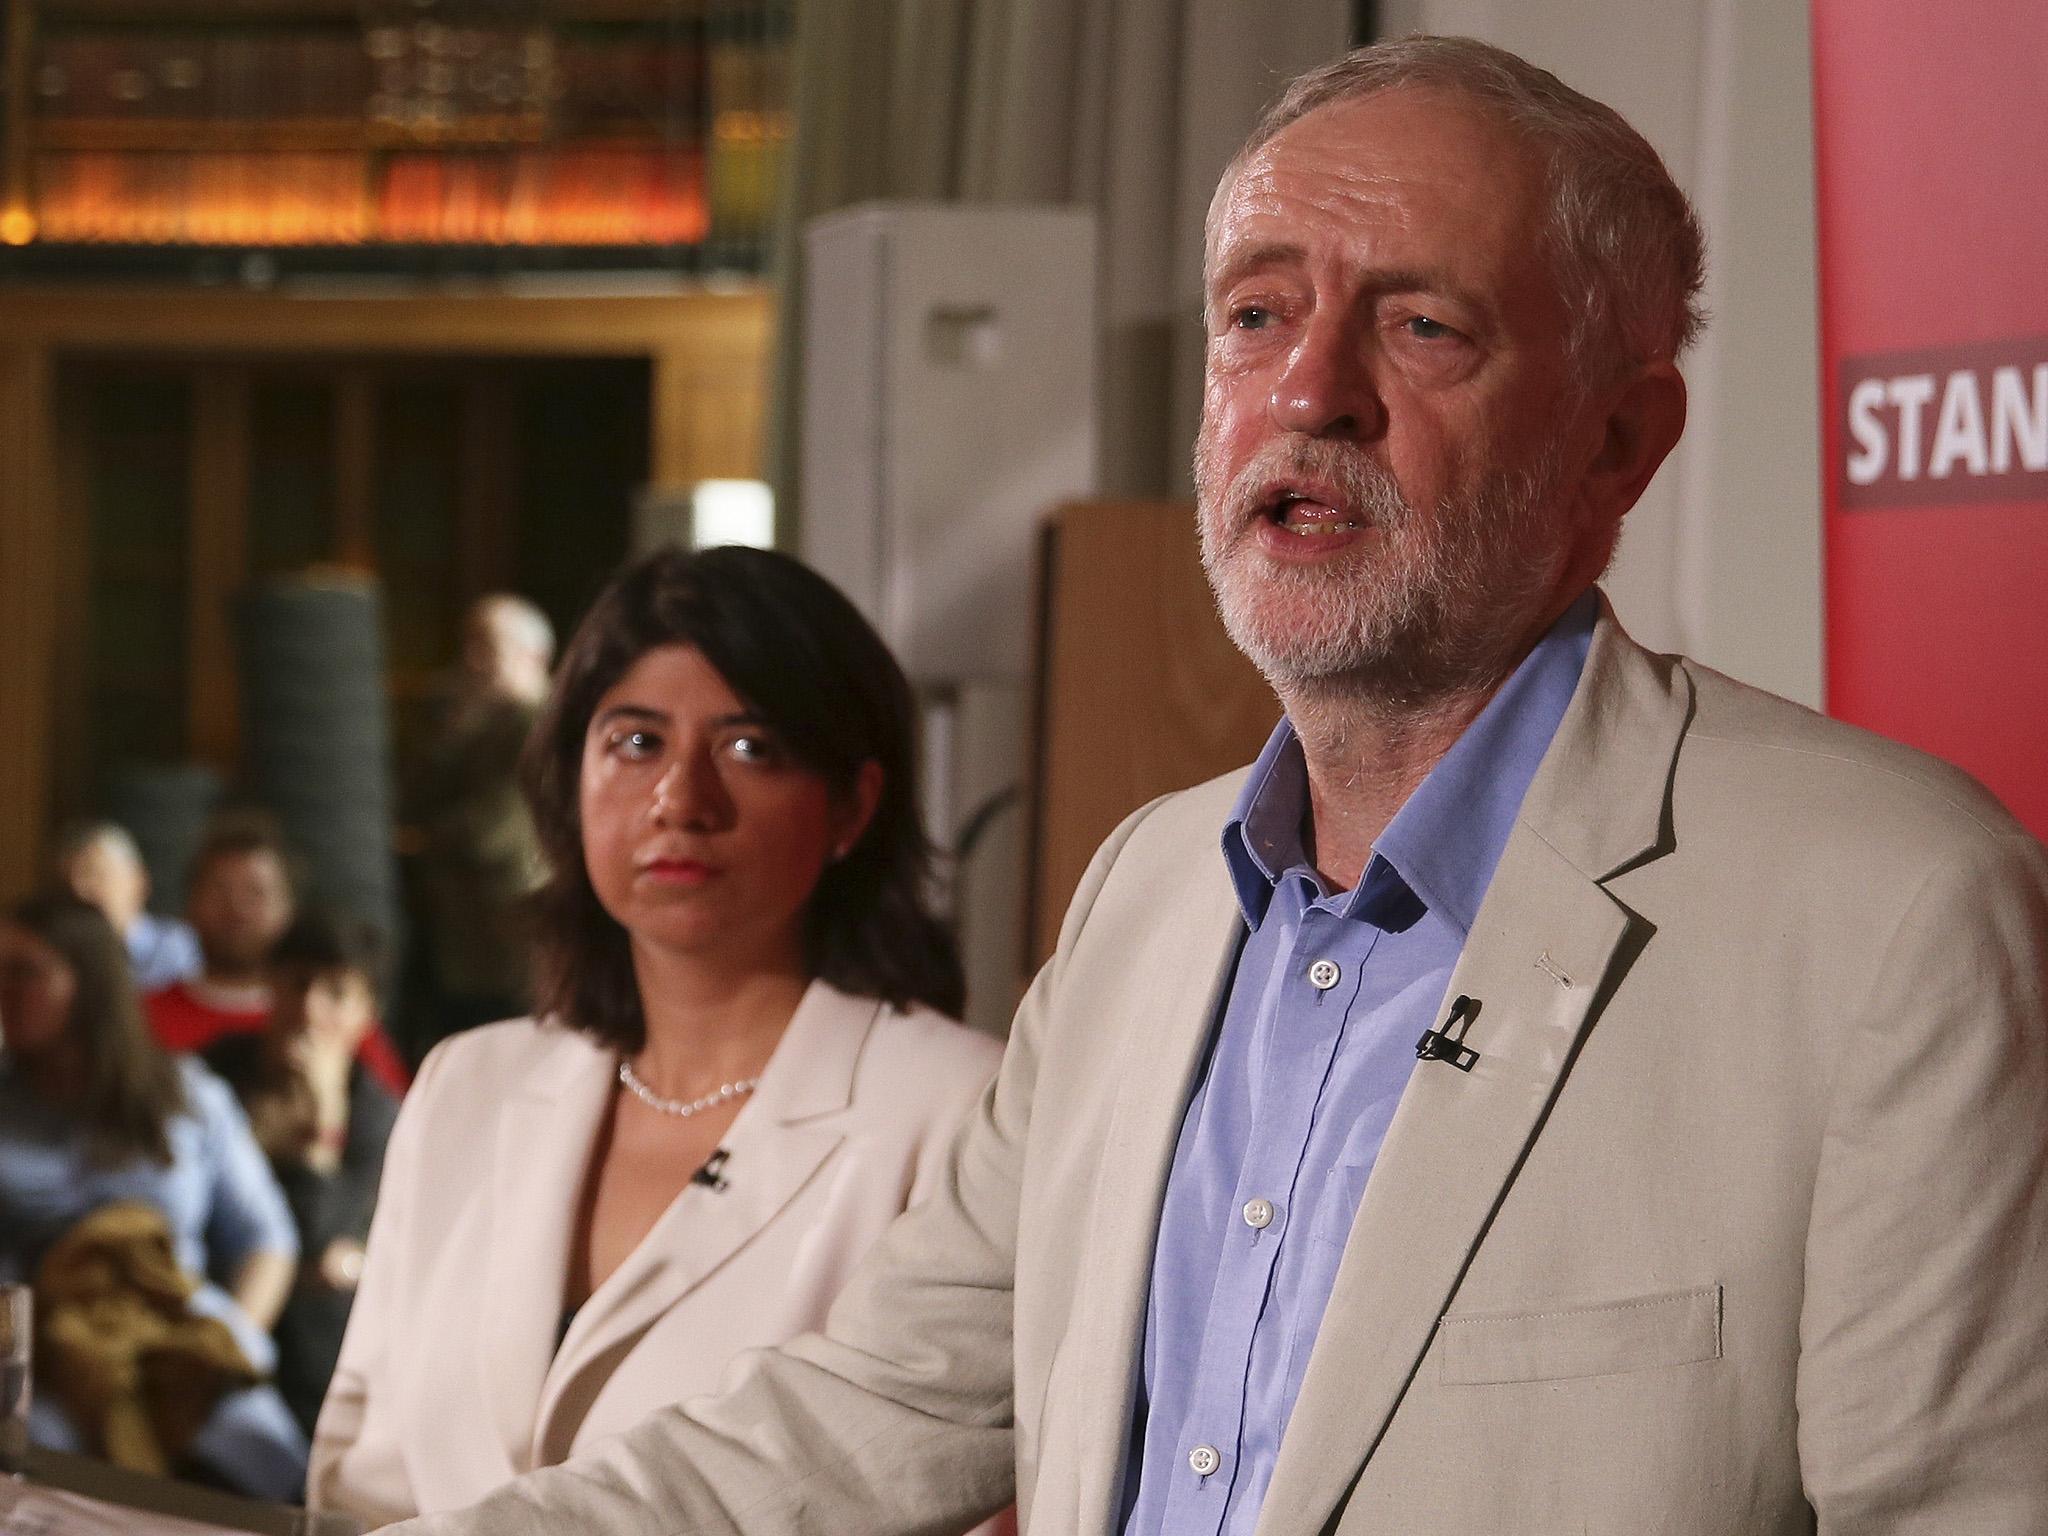 Seema Malhotra had accused a Corbyn loyalist aide of entering her office without permission